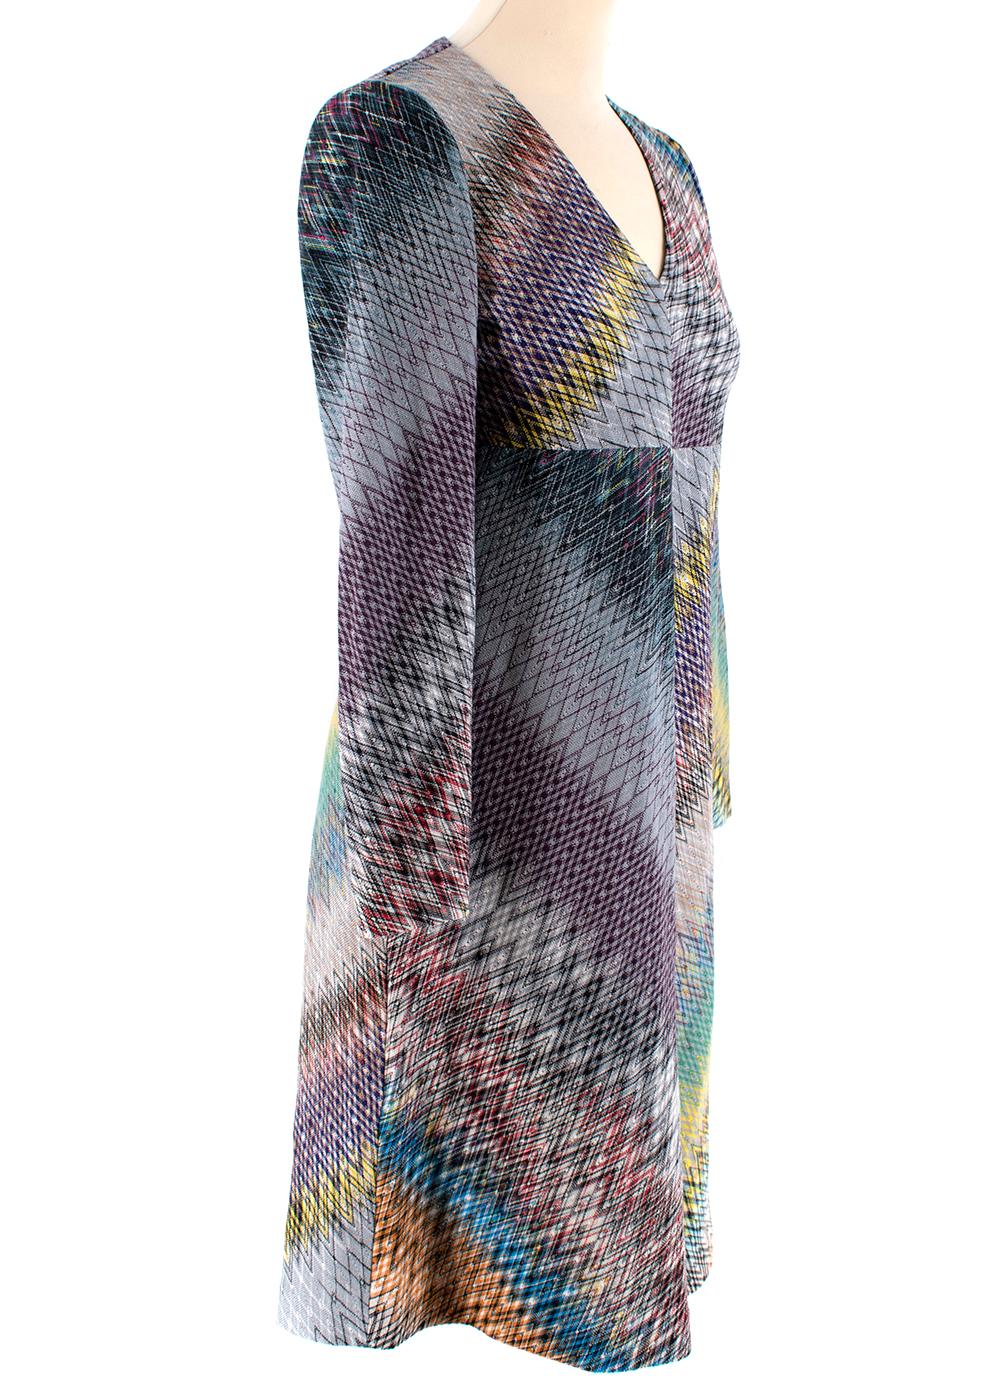 Missoni Patterned Paneled Long Sleeve Knit Dress

- Made of a soft knit 
- Signature chevron style pattern 
- Gorgeous multicolor hues 
- Classic cut 
- Long sleeve 
- V shaped neckline 
- Flared skirt 
- Zip fastening to the back 
- Cheerful